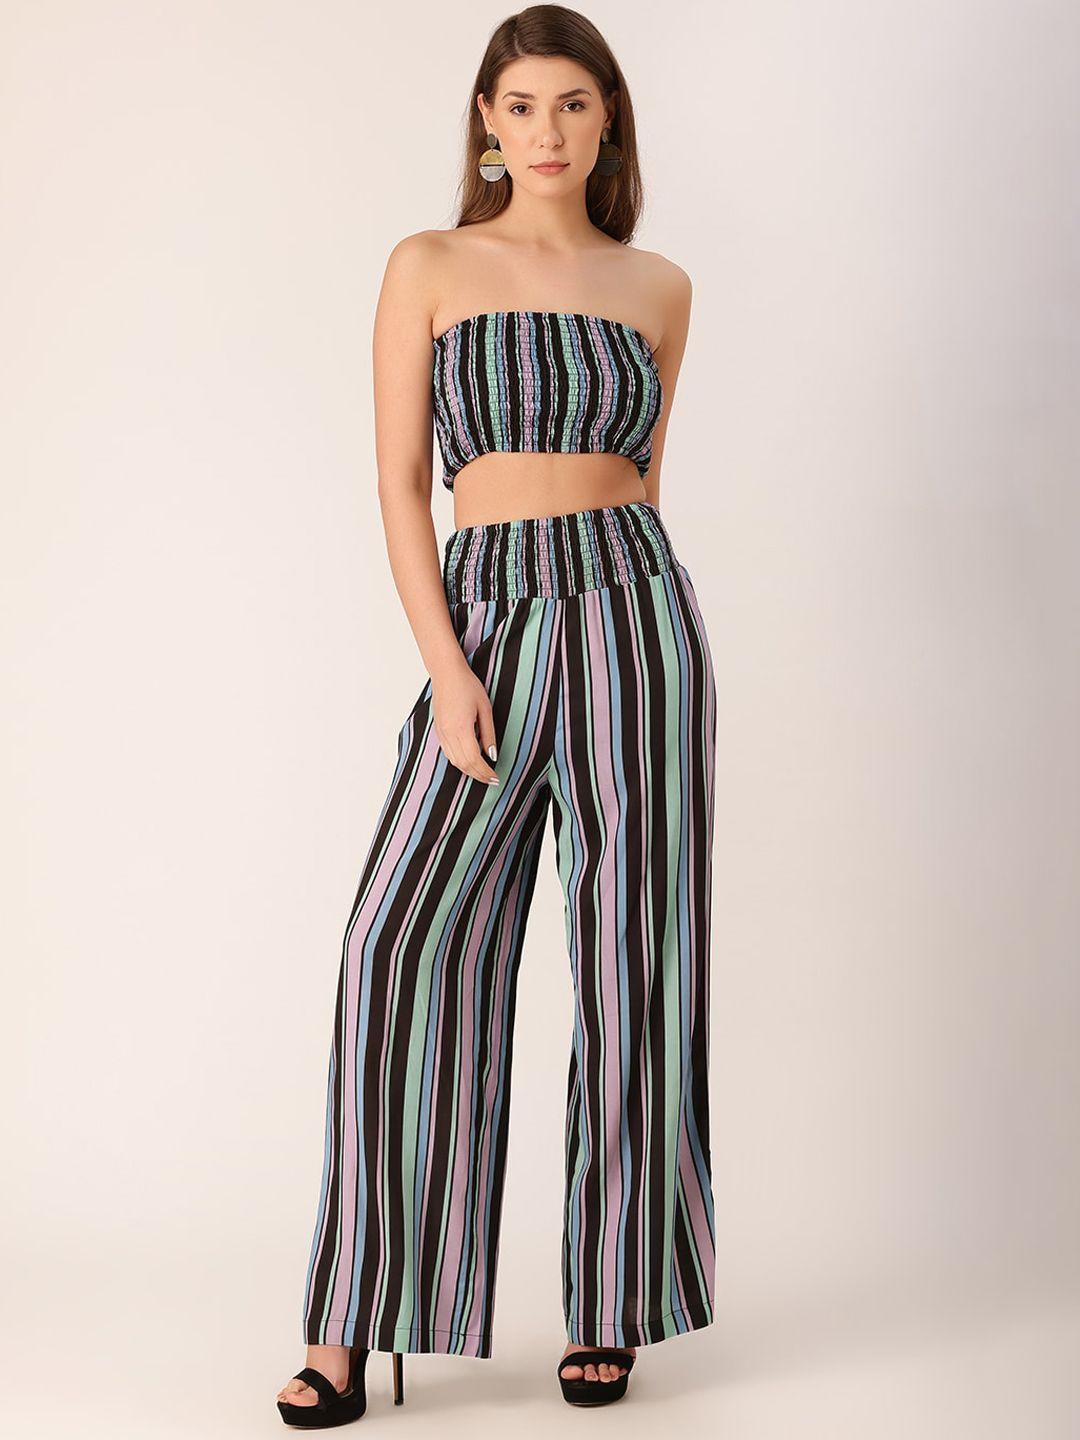 dressberry striped strapless co-ord set